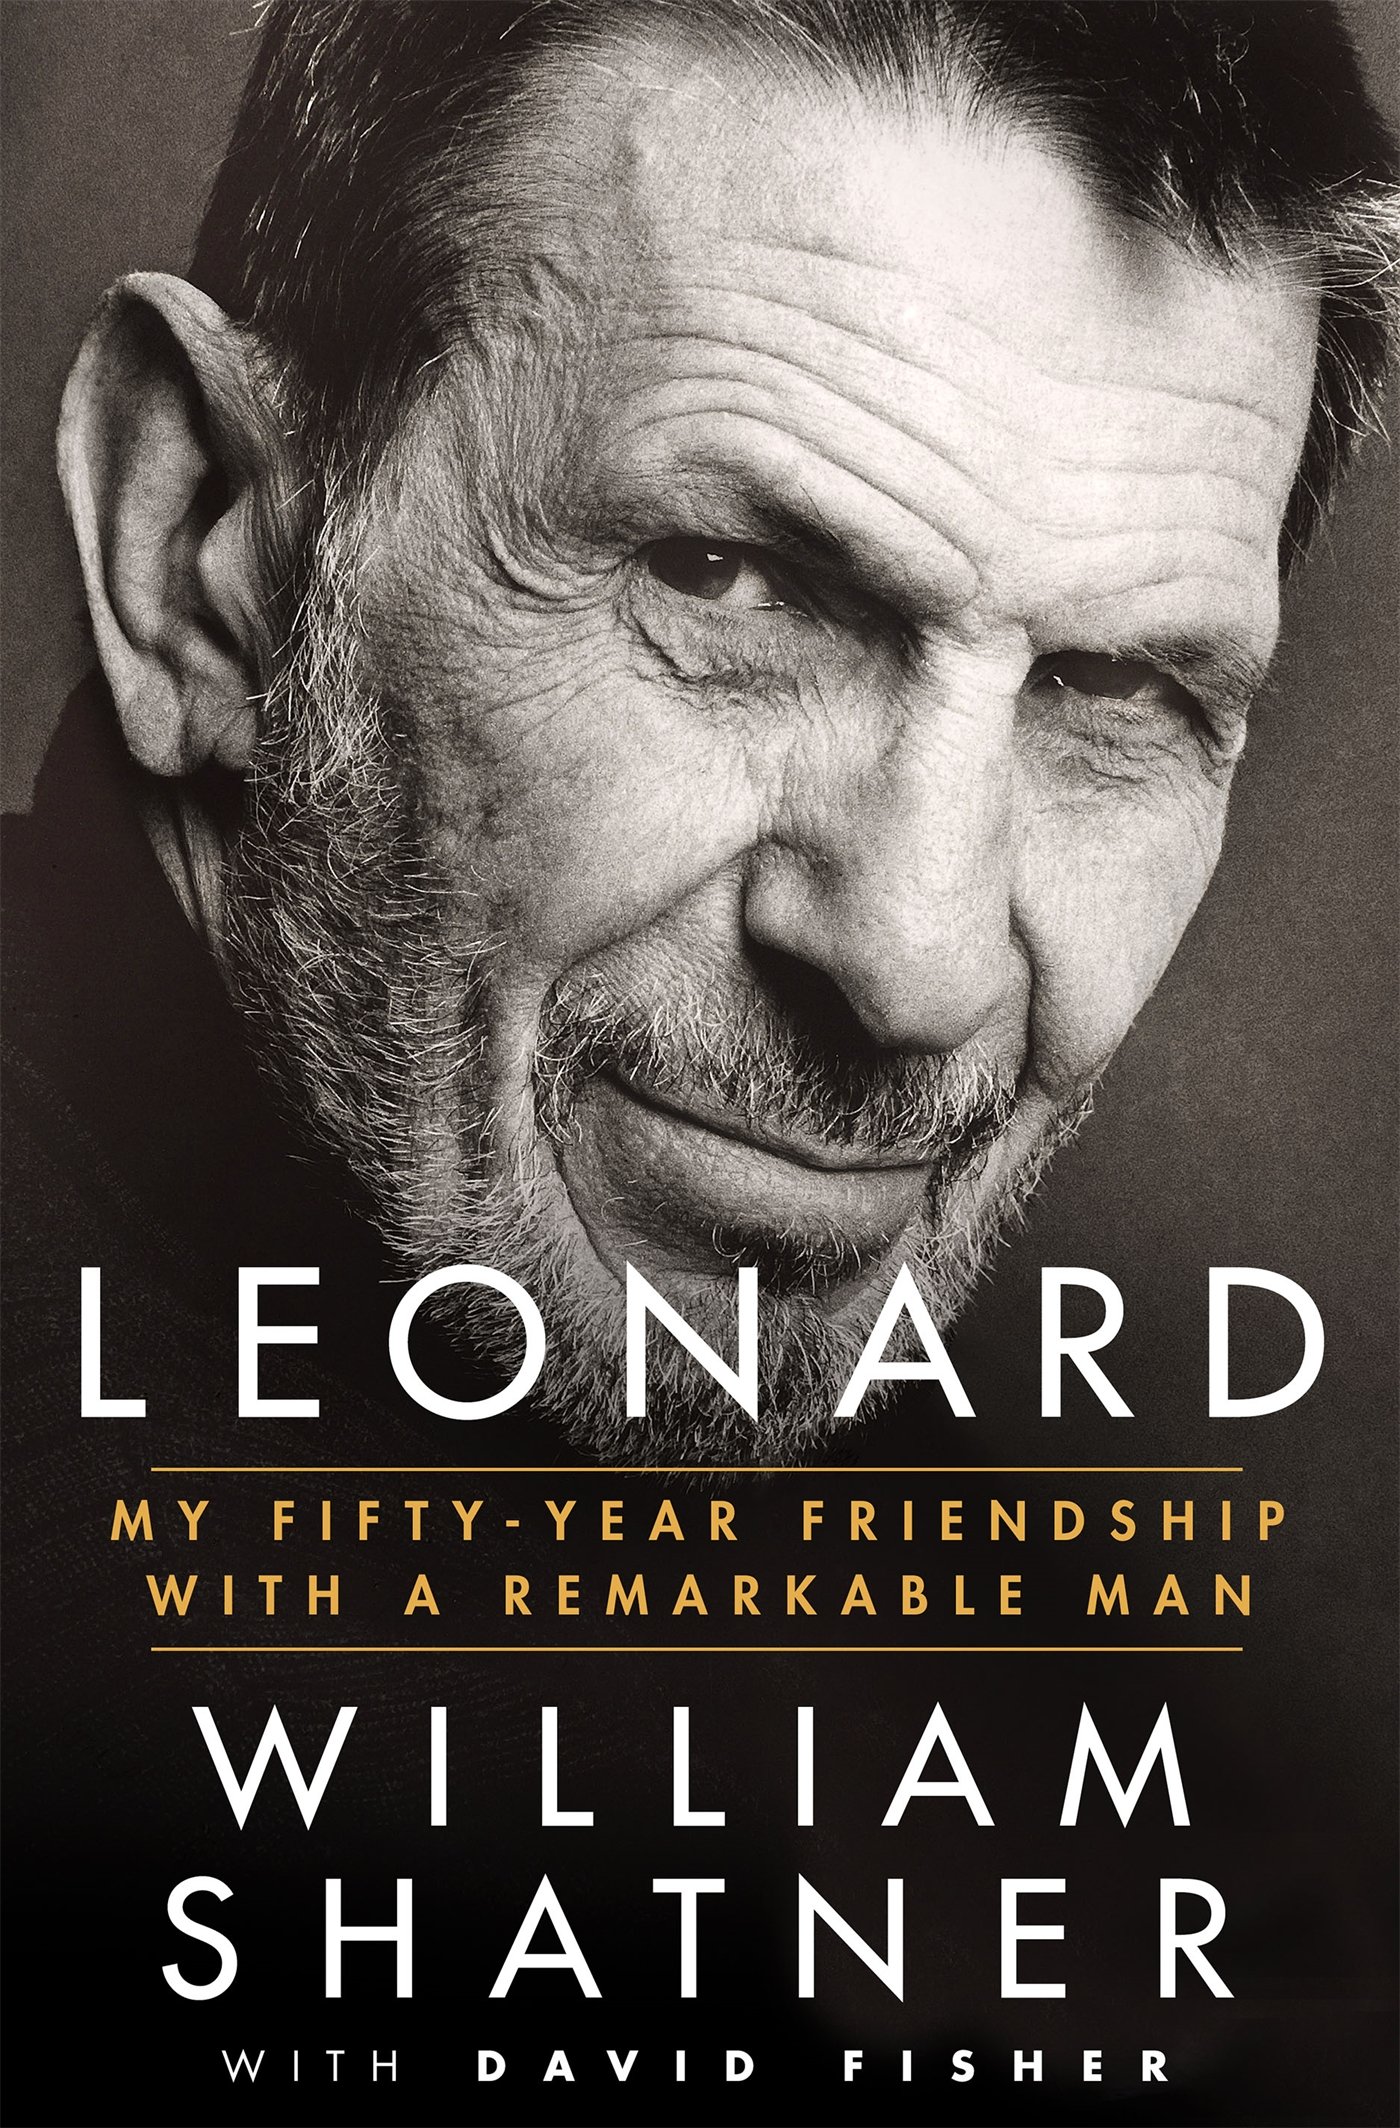 “Leonard: My Fifty-Year Friendship with a Remarkable Man” Review by Jimsscifi.blogspot.com